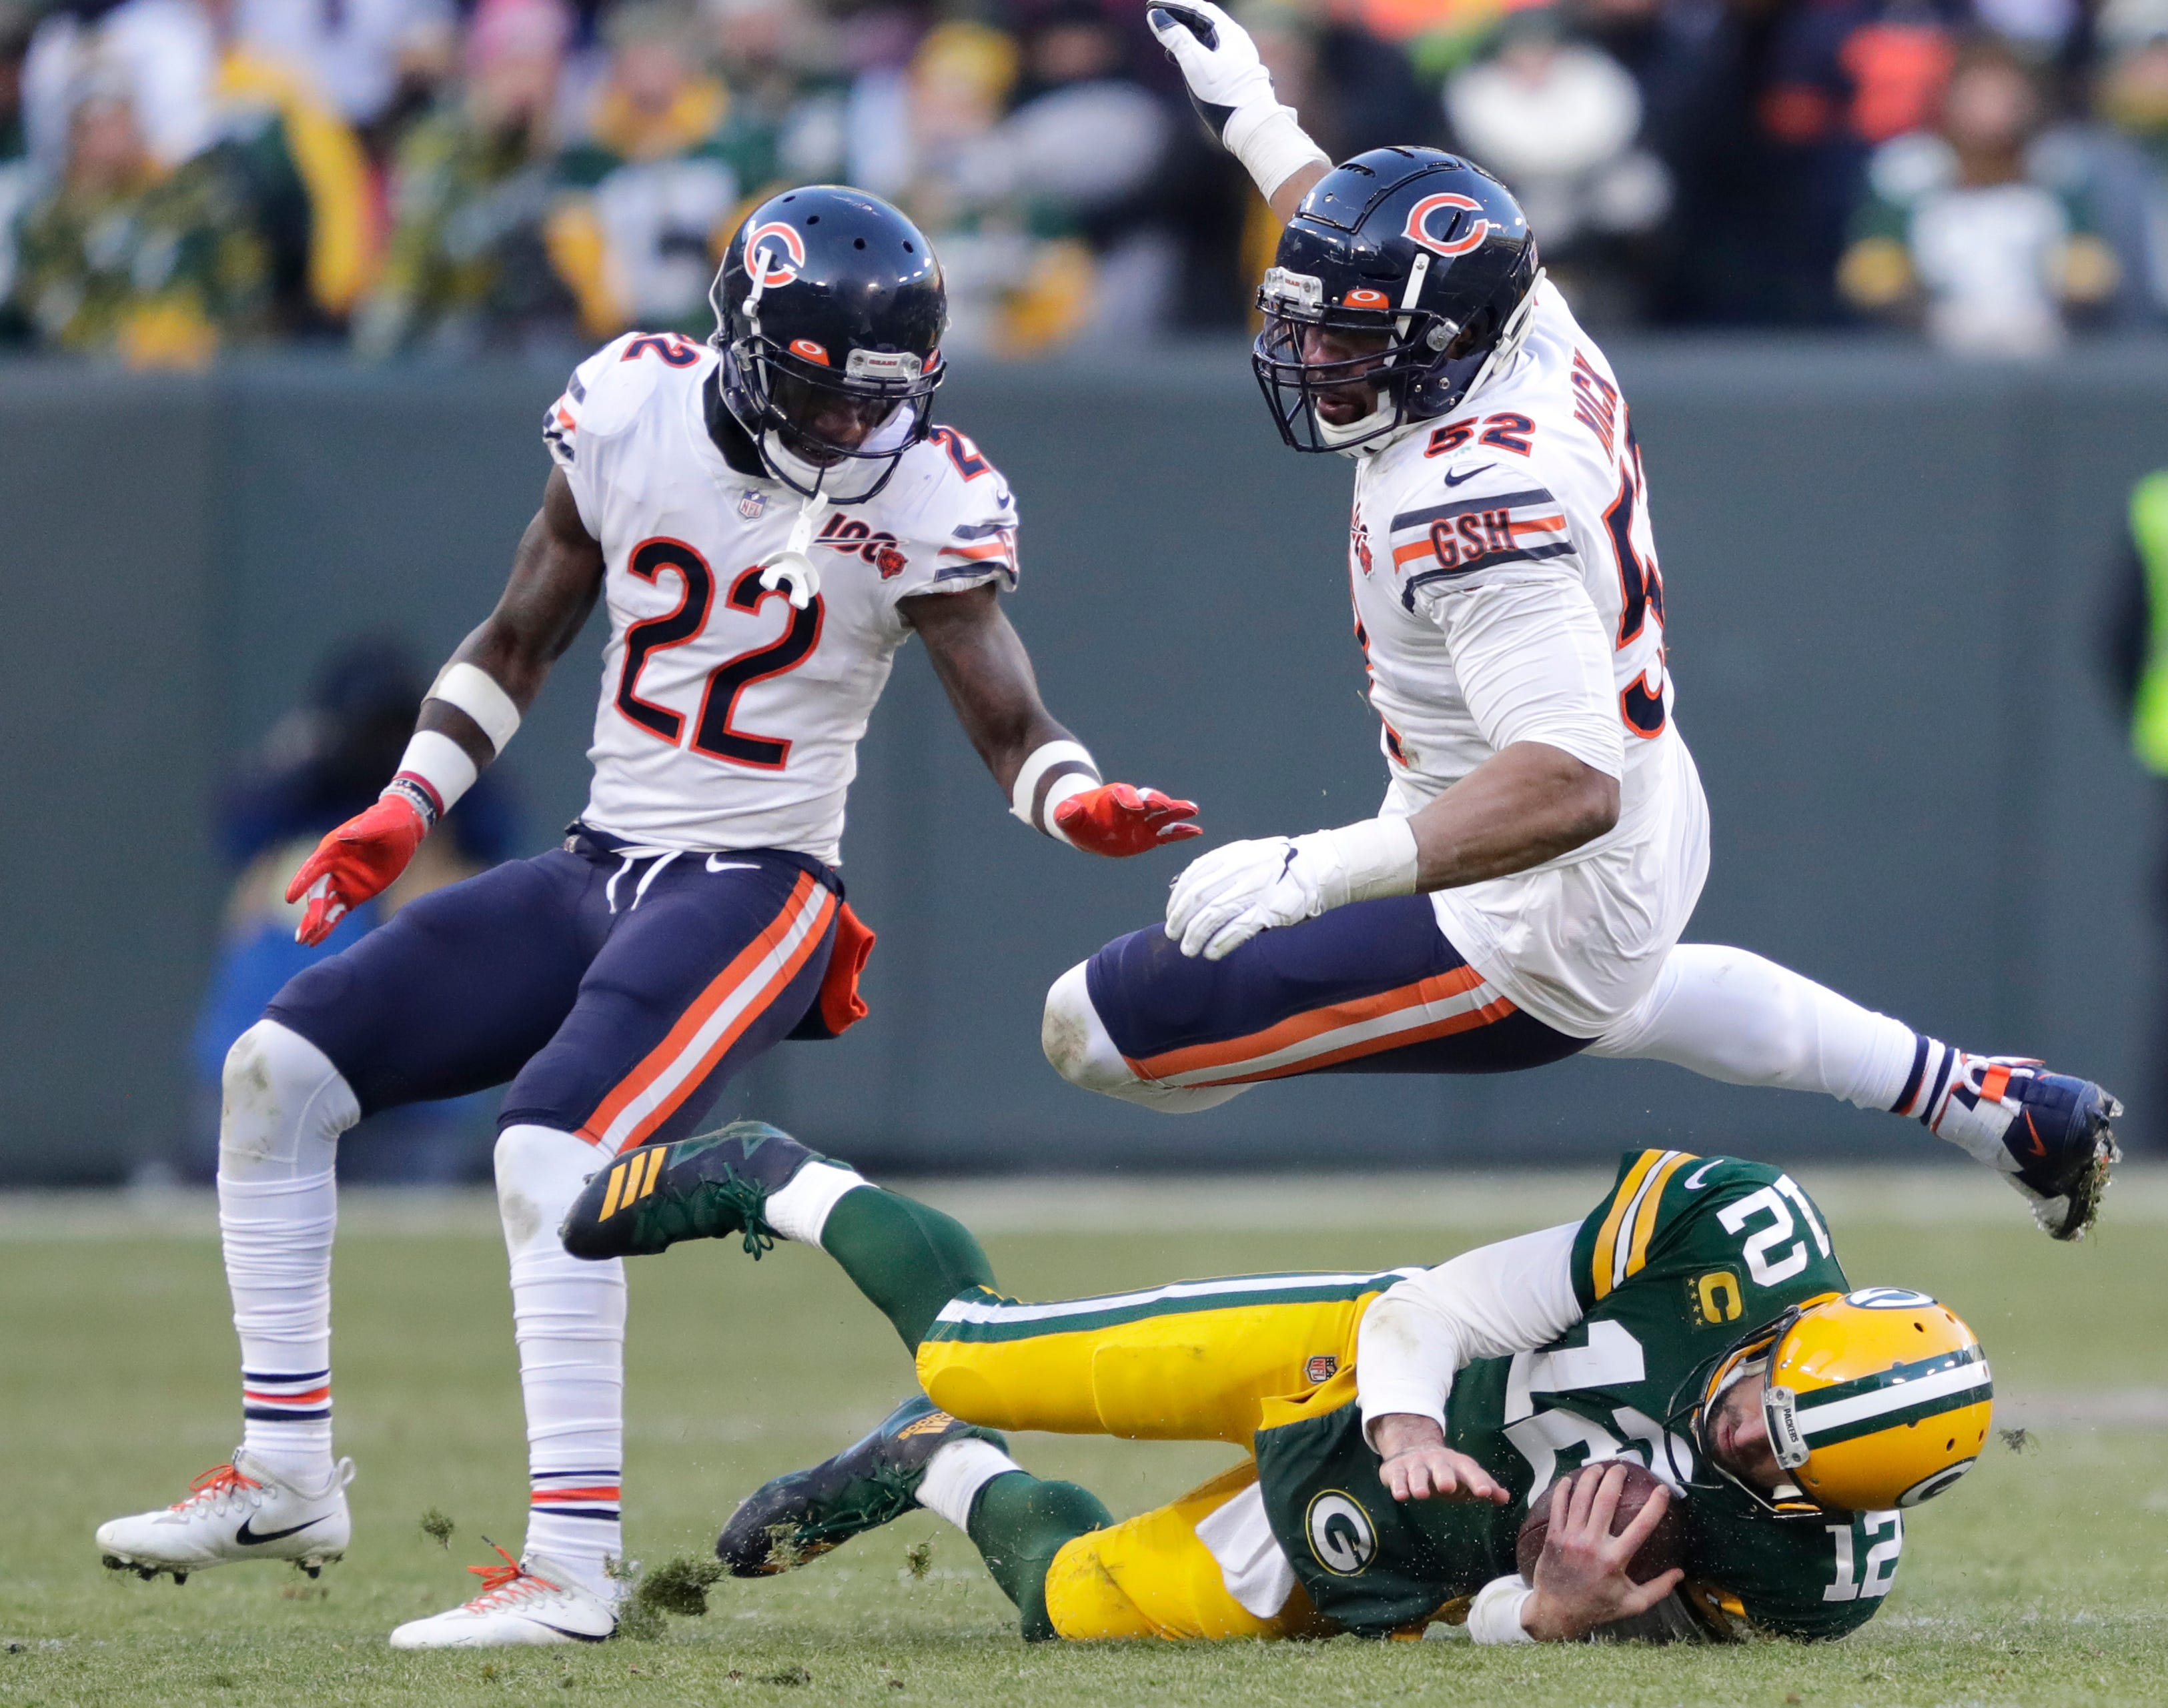 Green Bay Packers quarterback Aaron Rodgers (12) slides after a gain on third down against Chicago Bears defensive back Kevin Toliver (22) and Khalil Mack (52) late in the fourth quarter Sunday, December 15, 2019, at Lambeau Field in Green Bay, Wis. Green Bay punted on the next play.